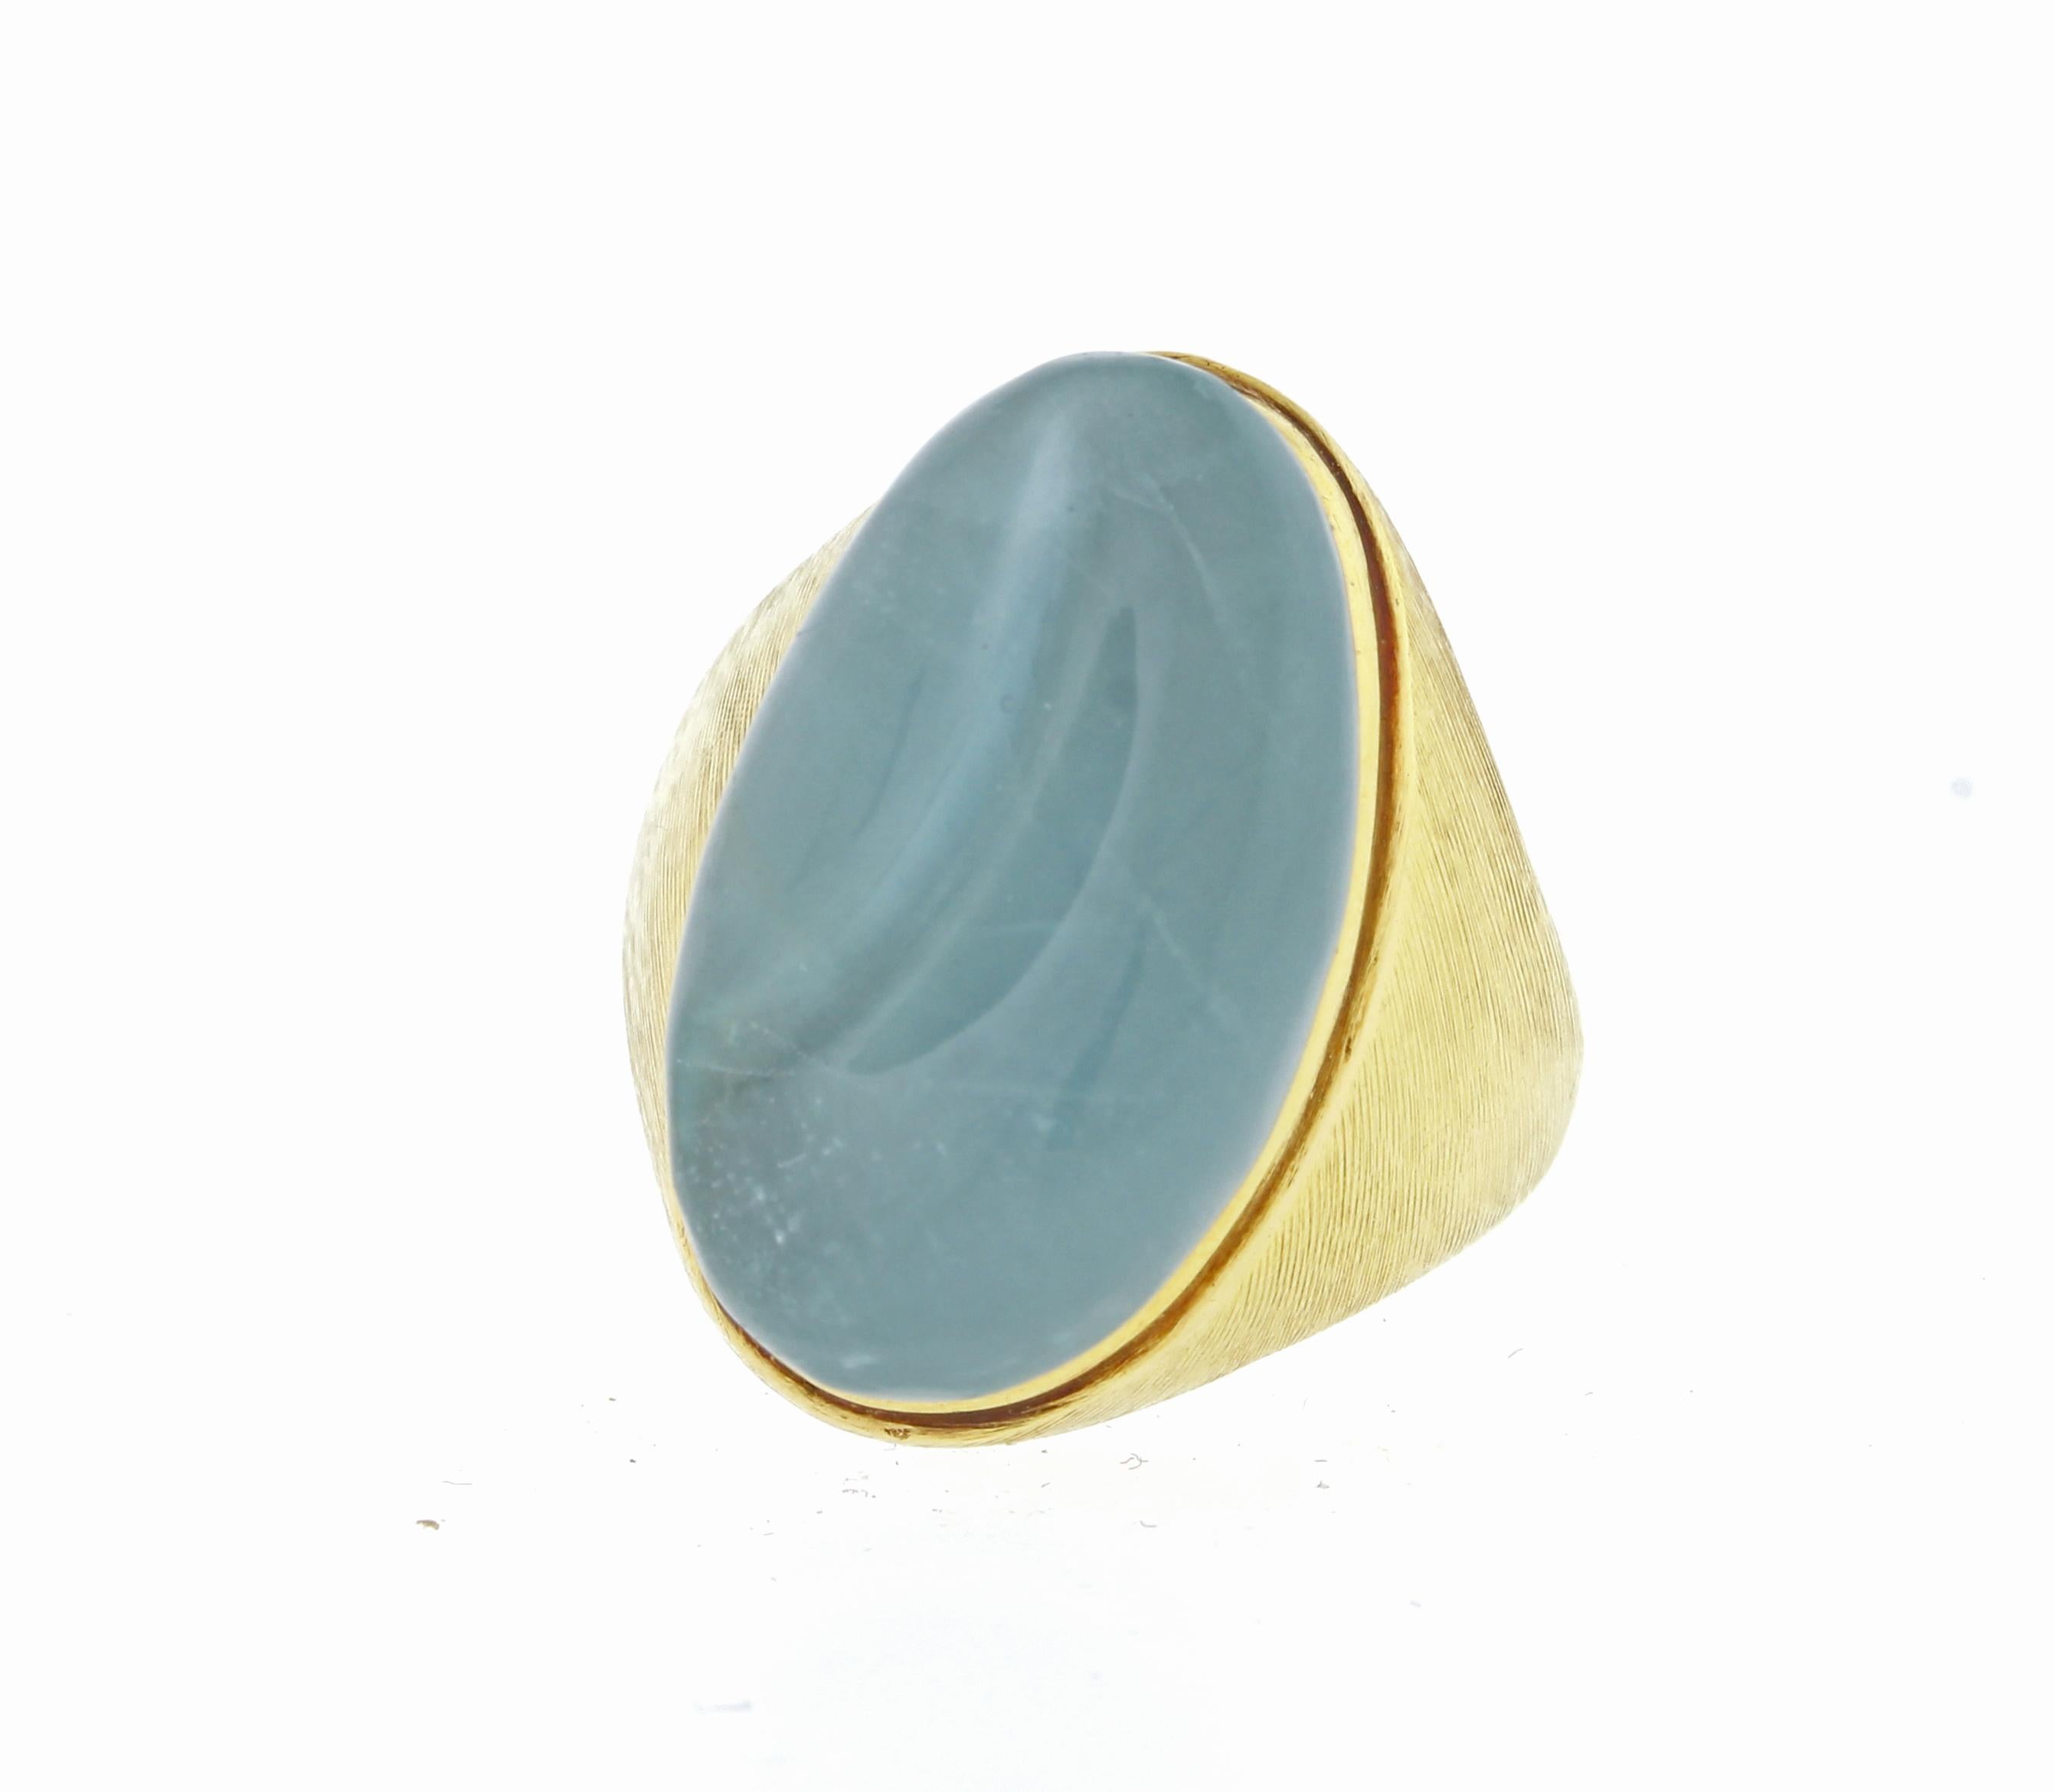 From Burle Marx, an intricately carved Aqua Ring in the “forma livre” (free form) style. Haroldo Burle Marx was particularly known for his use of large gemstones, often fashioned by carving or tumbling. The carved blue Aqua measures 11.8mm by